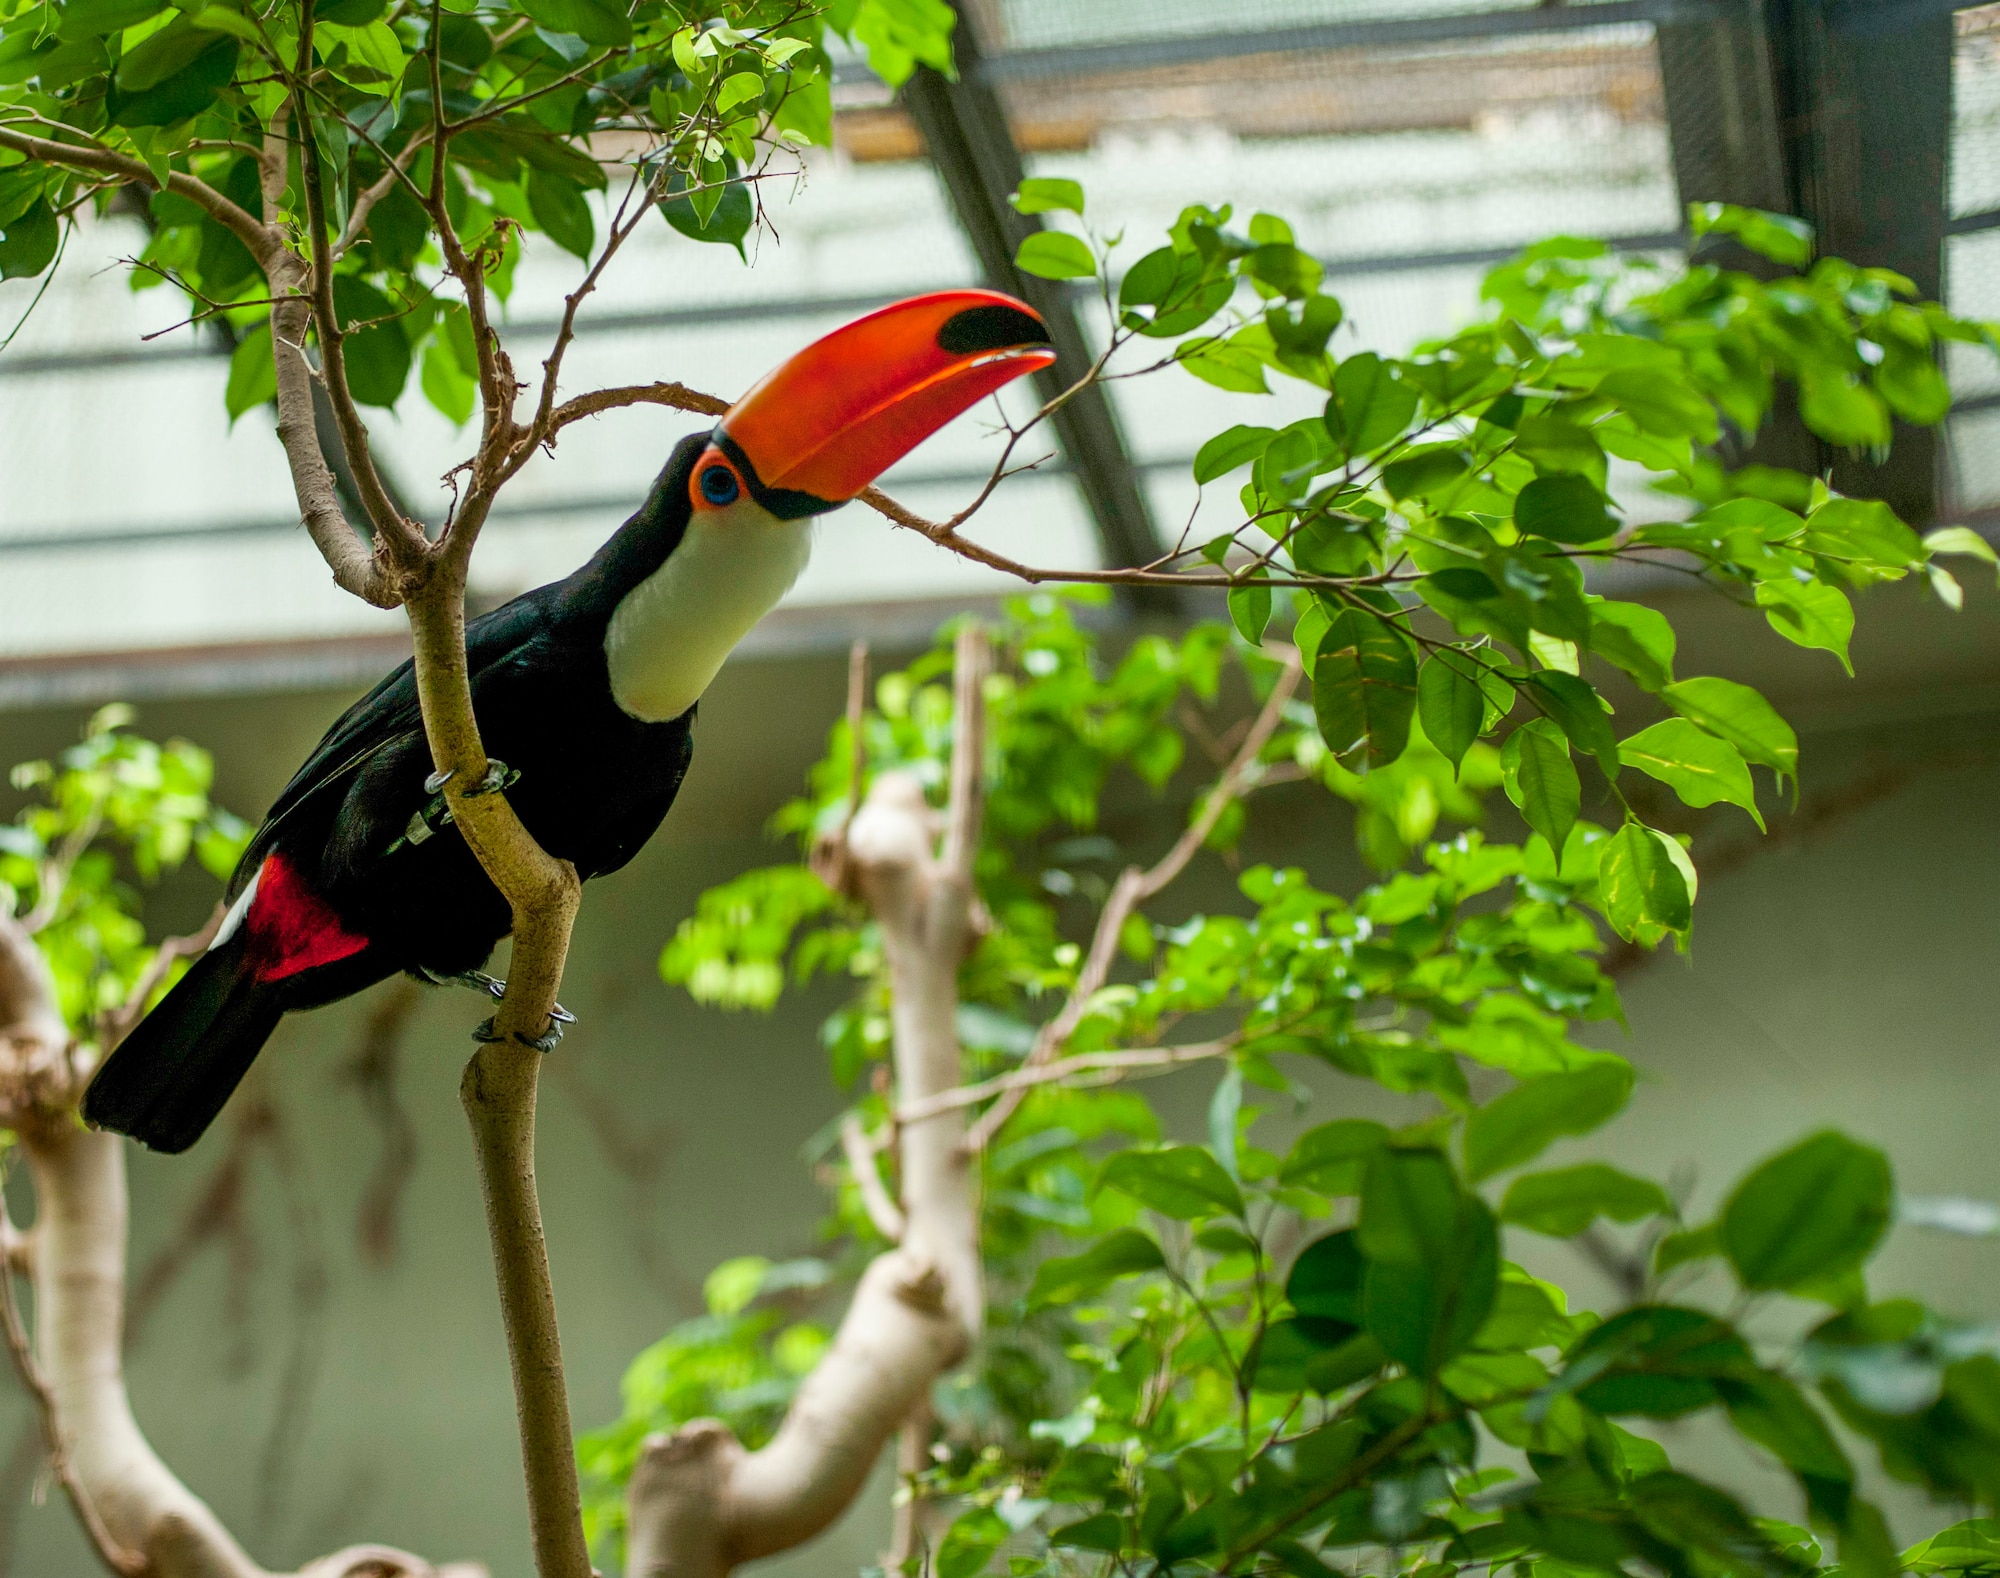 A Toco Toucan (Ramphastos toco) looks for a snack at Ueno Zoo Aug. 6, 2013. Toucans are omnivores and have a bill length of seven and a half inches. Toucans can use their bill to reach fruit that are on branches too small to support their weight. (U.S. Air Force photo by Senior Airman Michael Washburn)